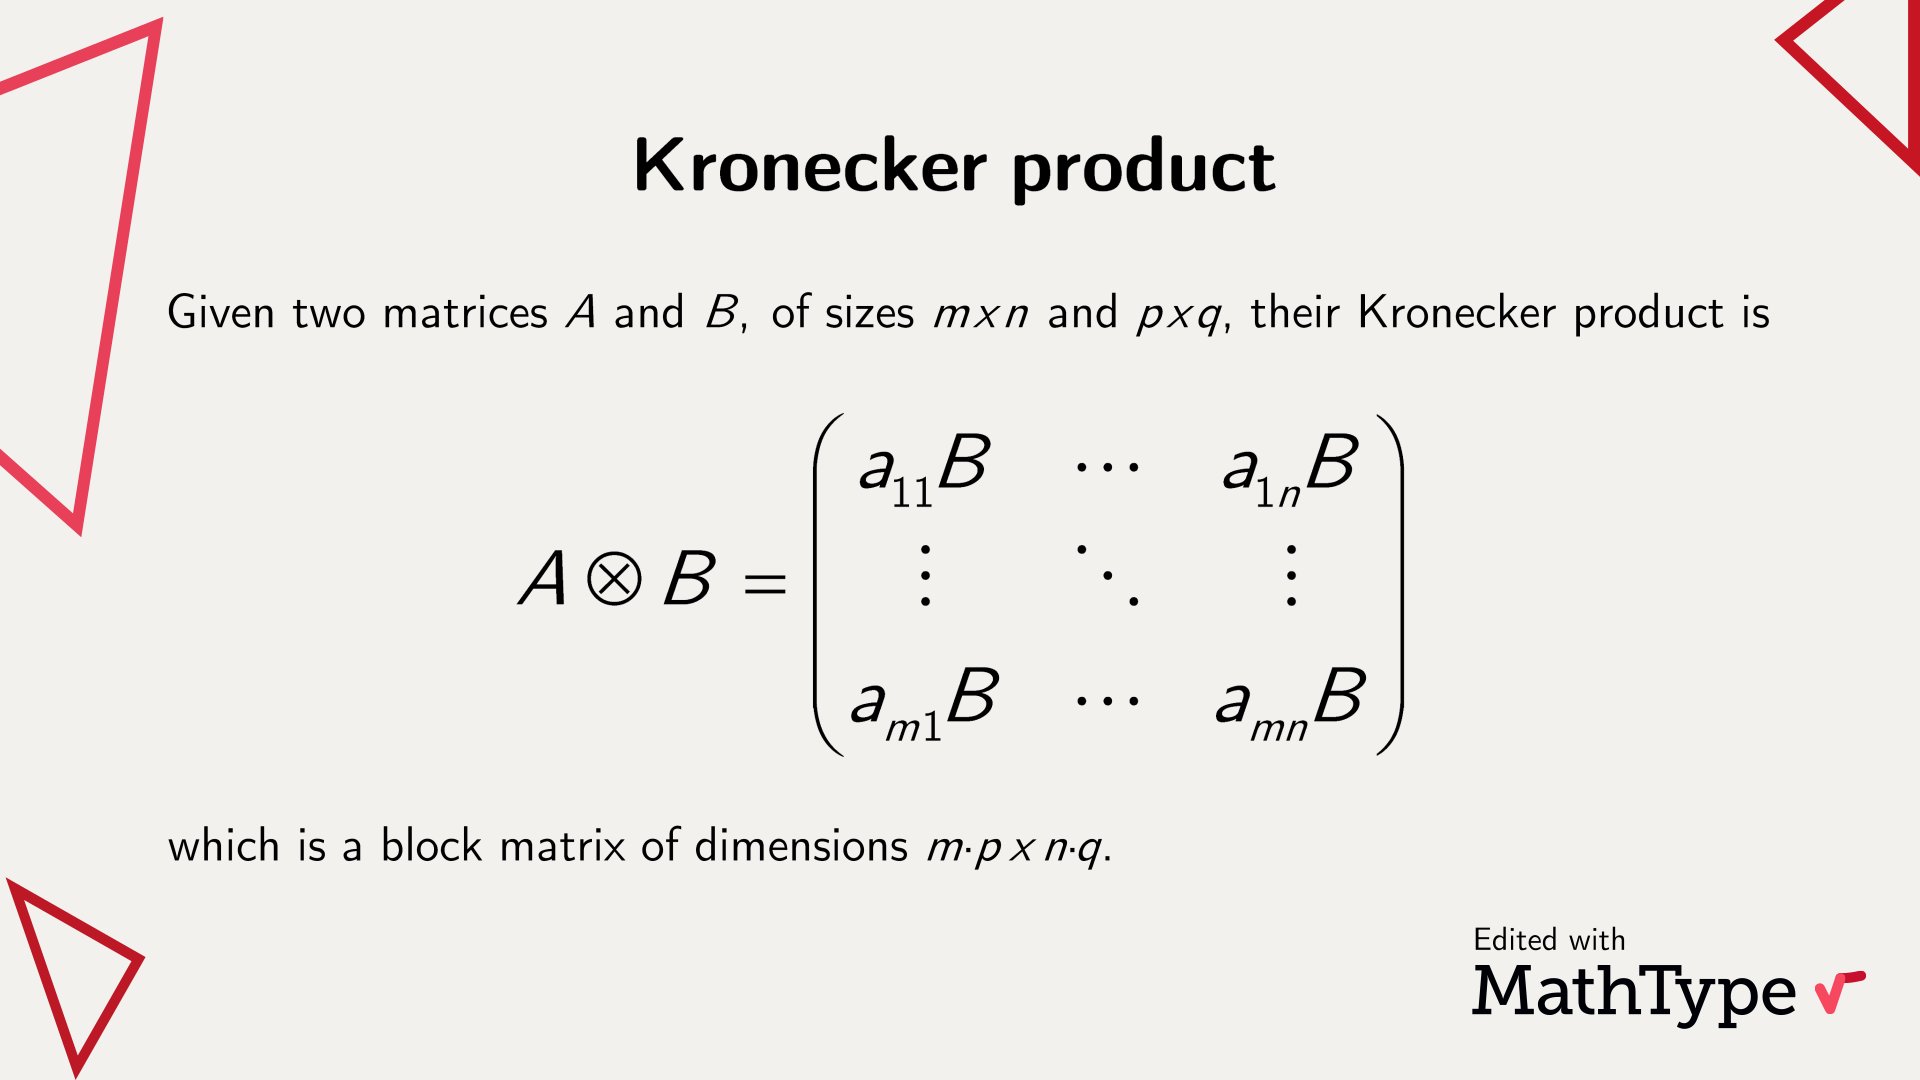 MathType on Twitter: "In #mathematics, the #Kronecker product is a  generalization of the outer product applied to matrices. Bilinearity,  associativity and non-commutativity are some of its properties. #MathType  https://t.co/hnD7Mm41LO" / Twitter